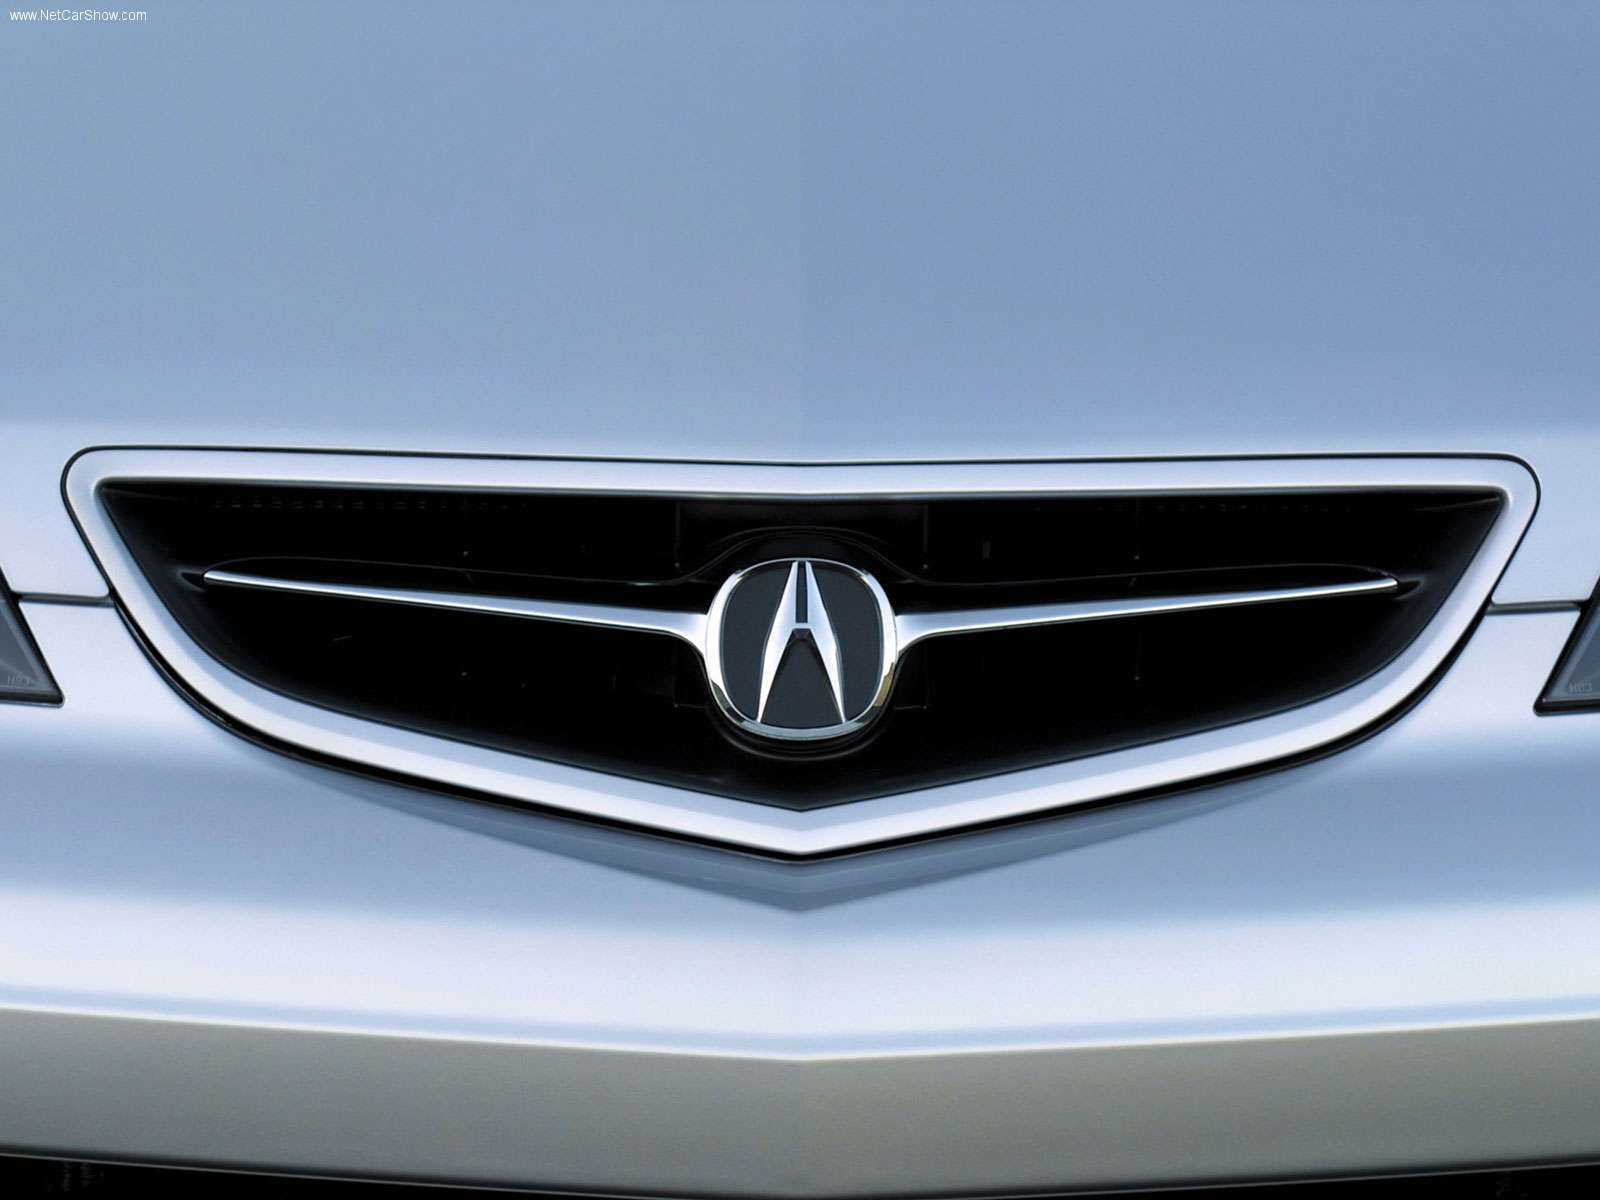 The shining chrome Acura badge sits in the middle of the grille of a silver car.